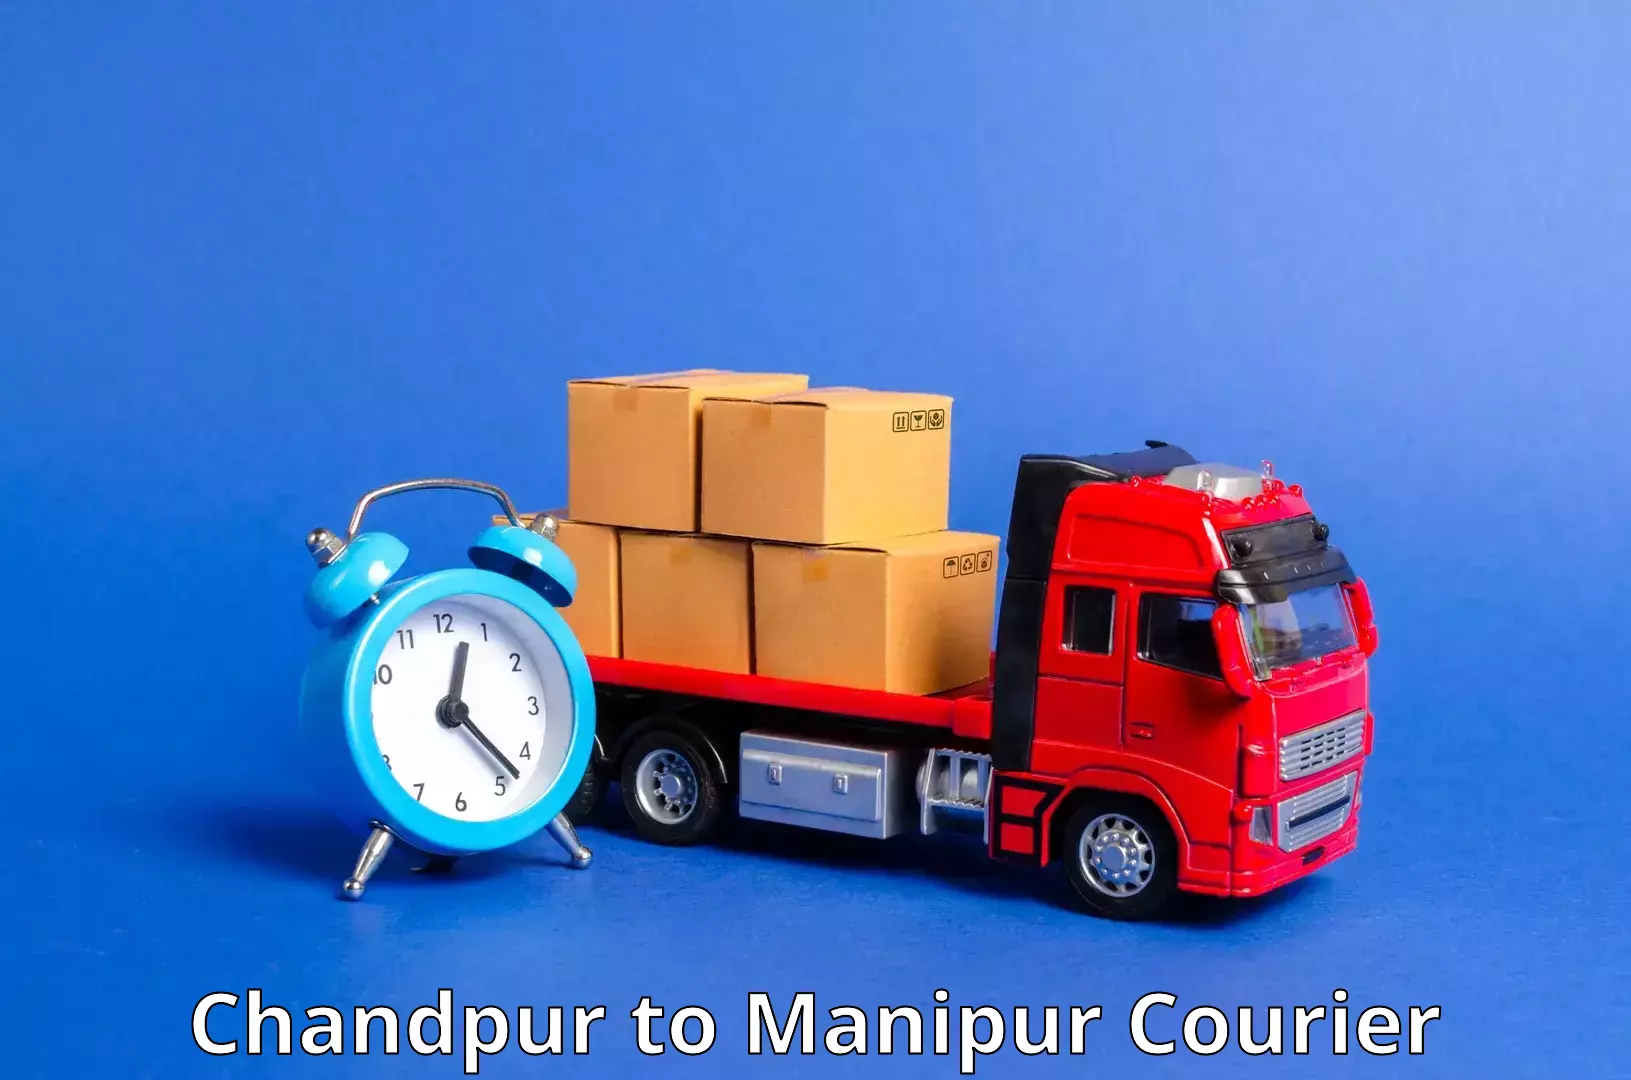 Comprehensive shipping network Chandpur to Imphal